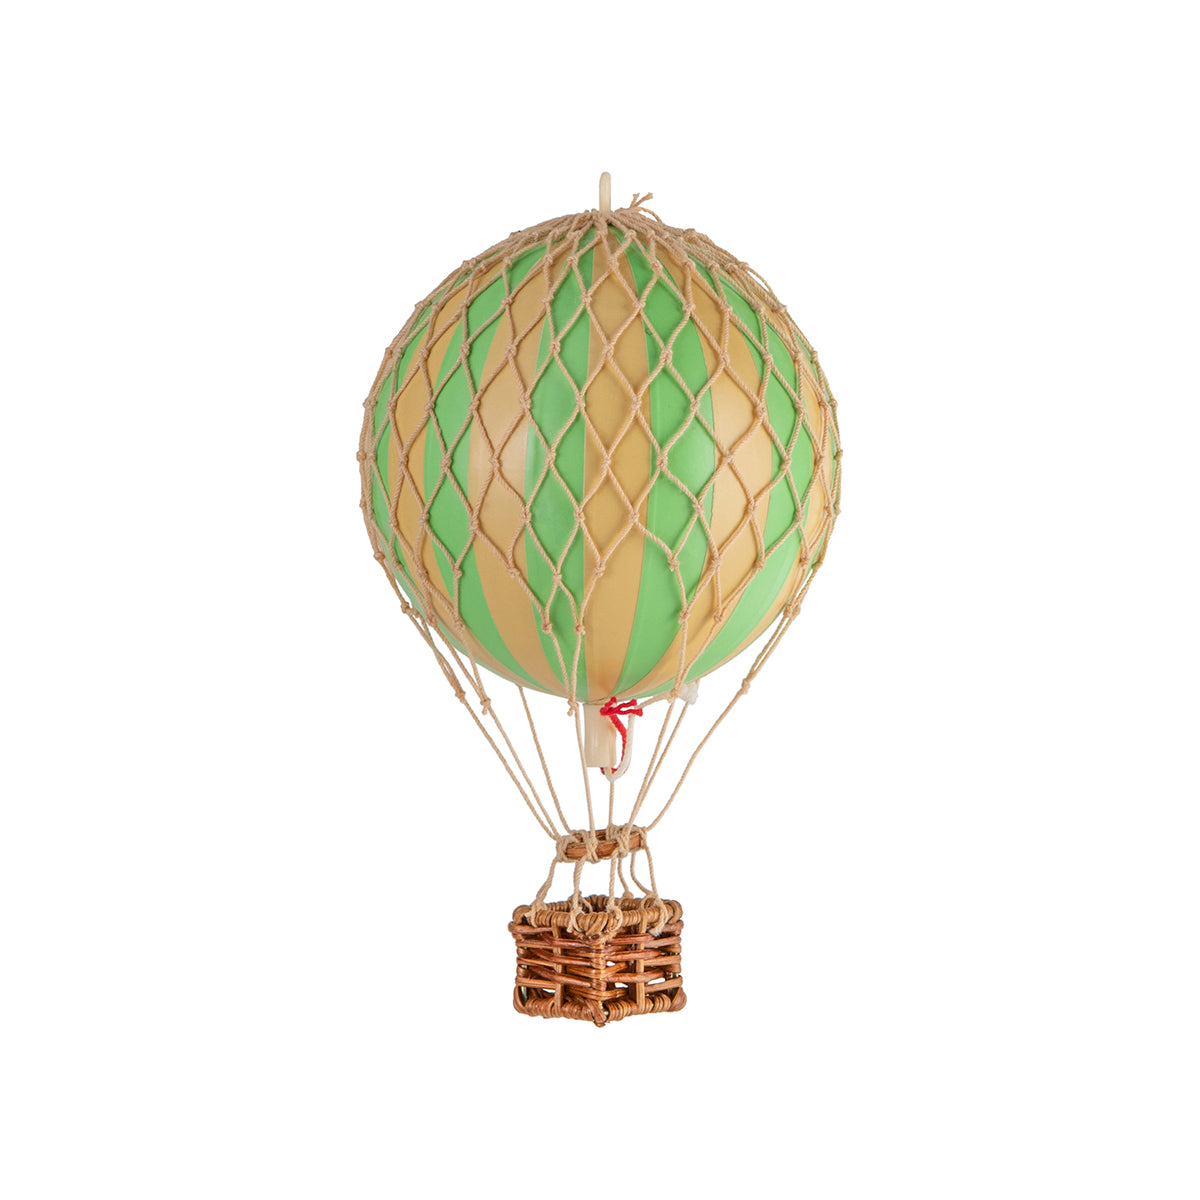 A whimsical journey featuring a Wonderen Extra Small Hot Air Balloon - Floating The Skies, from the brand Wonderen Stroopwafels, against a white background.